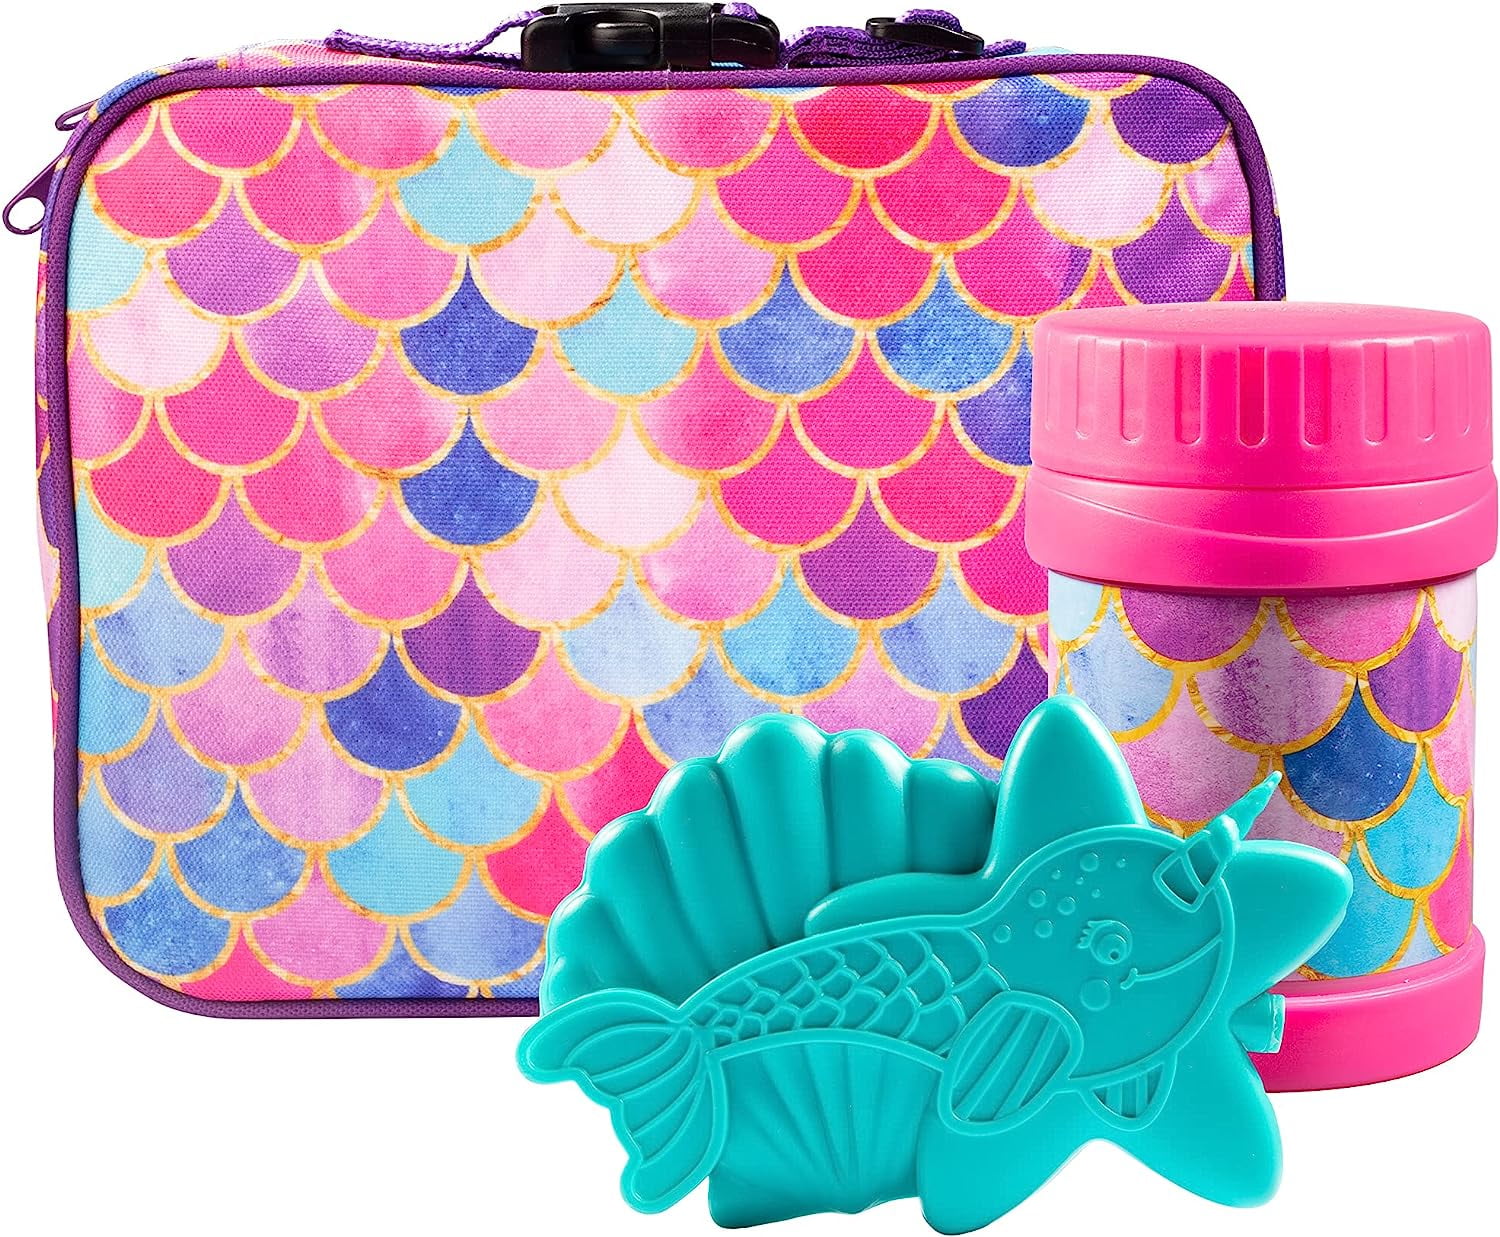  Fairy Lunch Box with Thermos, Matching Bag and Ice Pack Set for  Girls, Kids Bento Box wtih 5 Compartments, Lunch Bag, Food Jar Set, Pink  Fairy Princess : Home & Kitchen